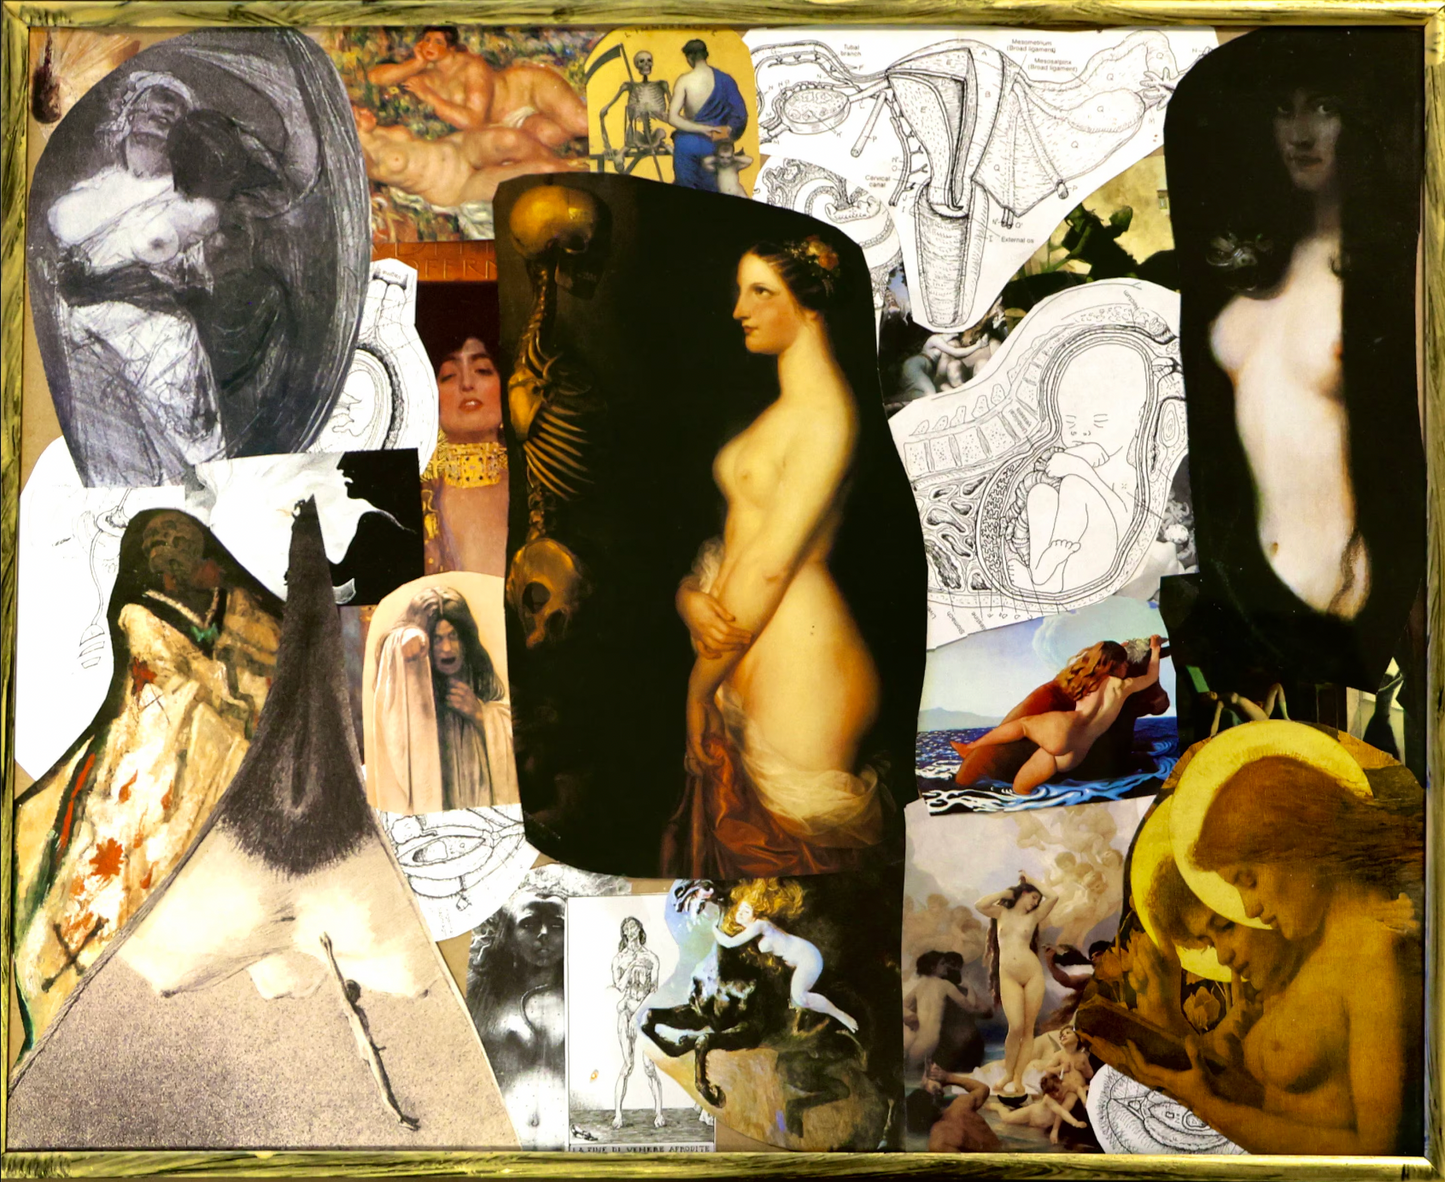 “Lust of Libidine” 18” x 24” collage poster print